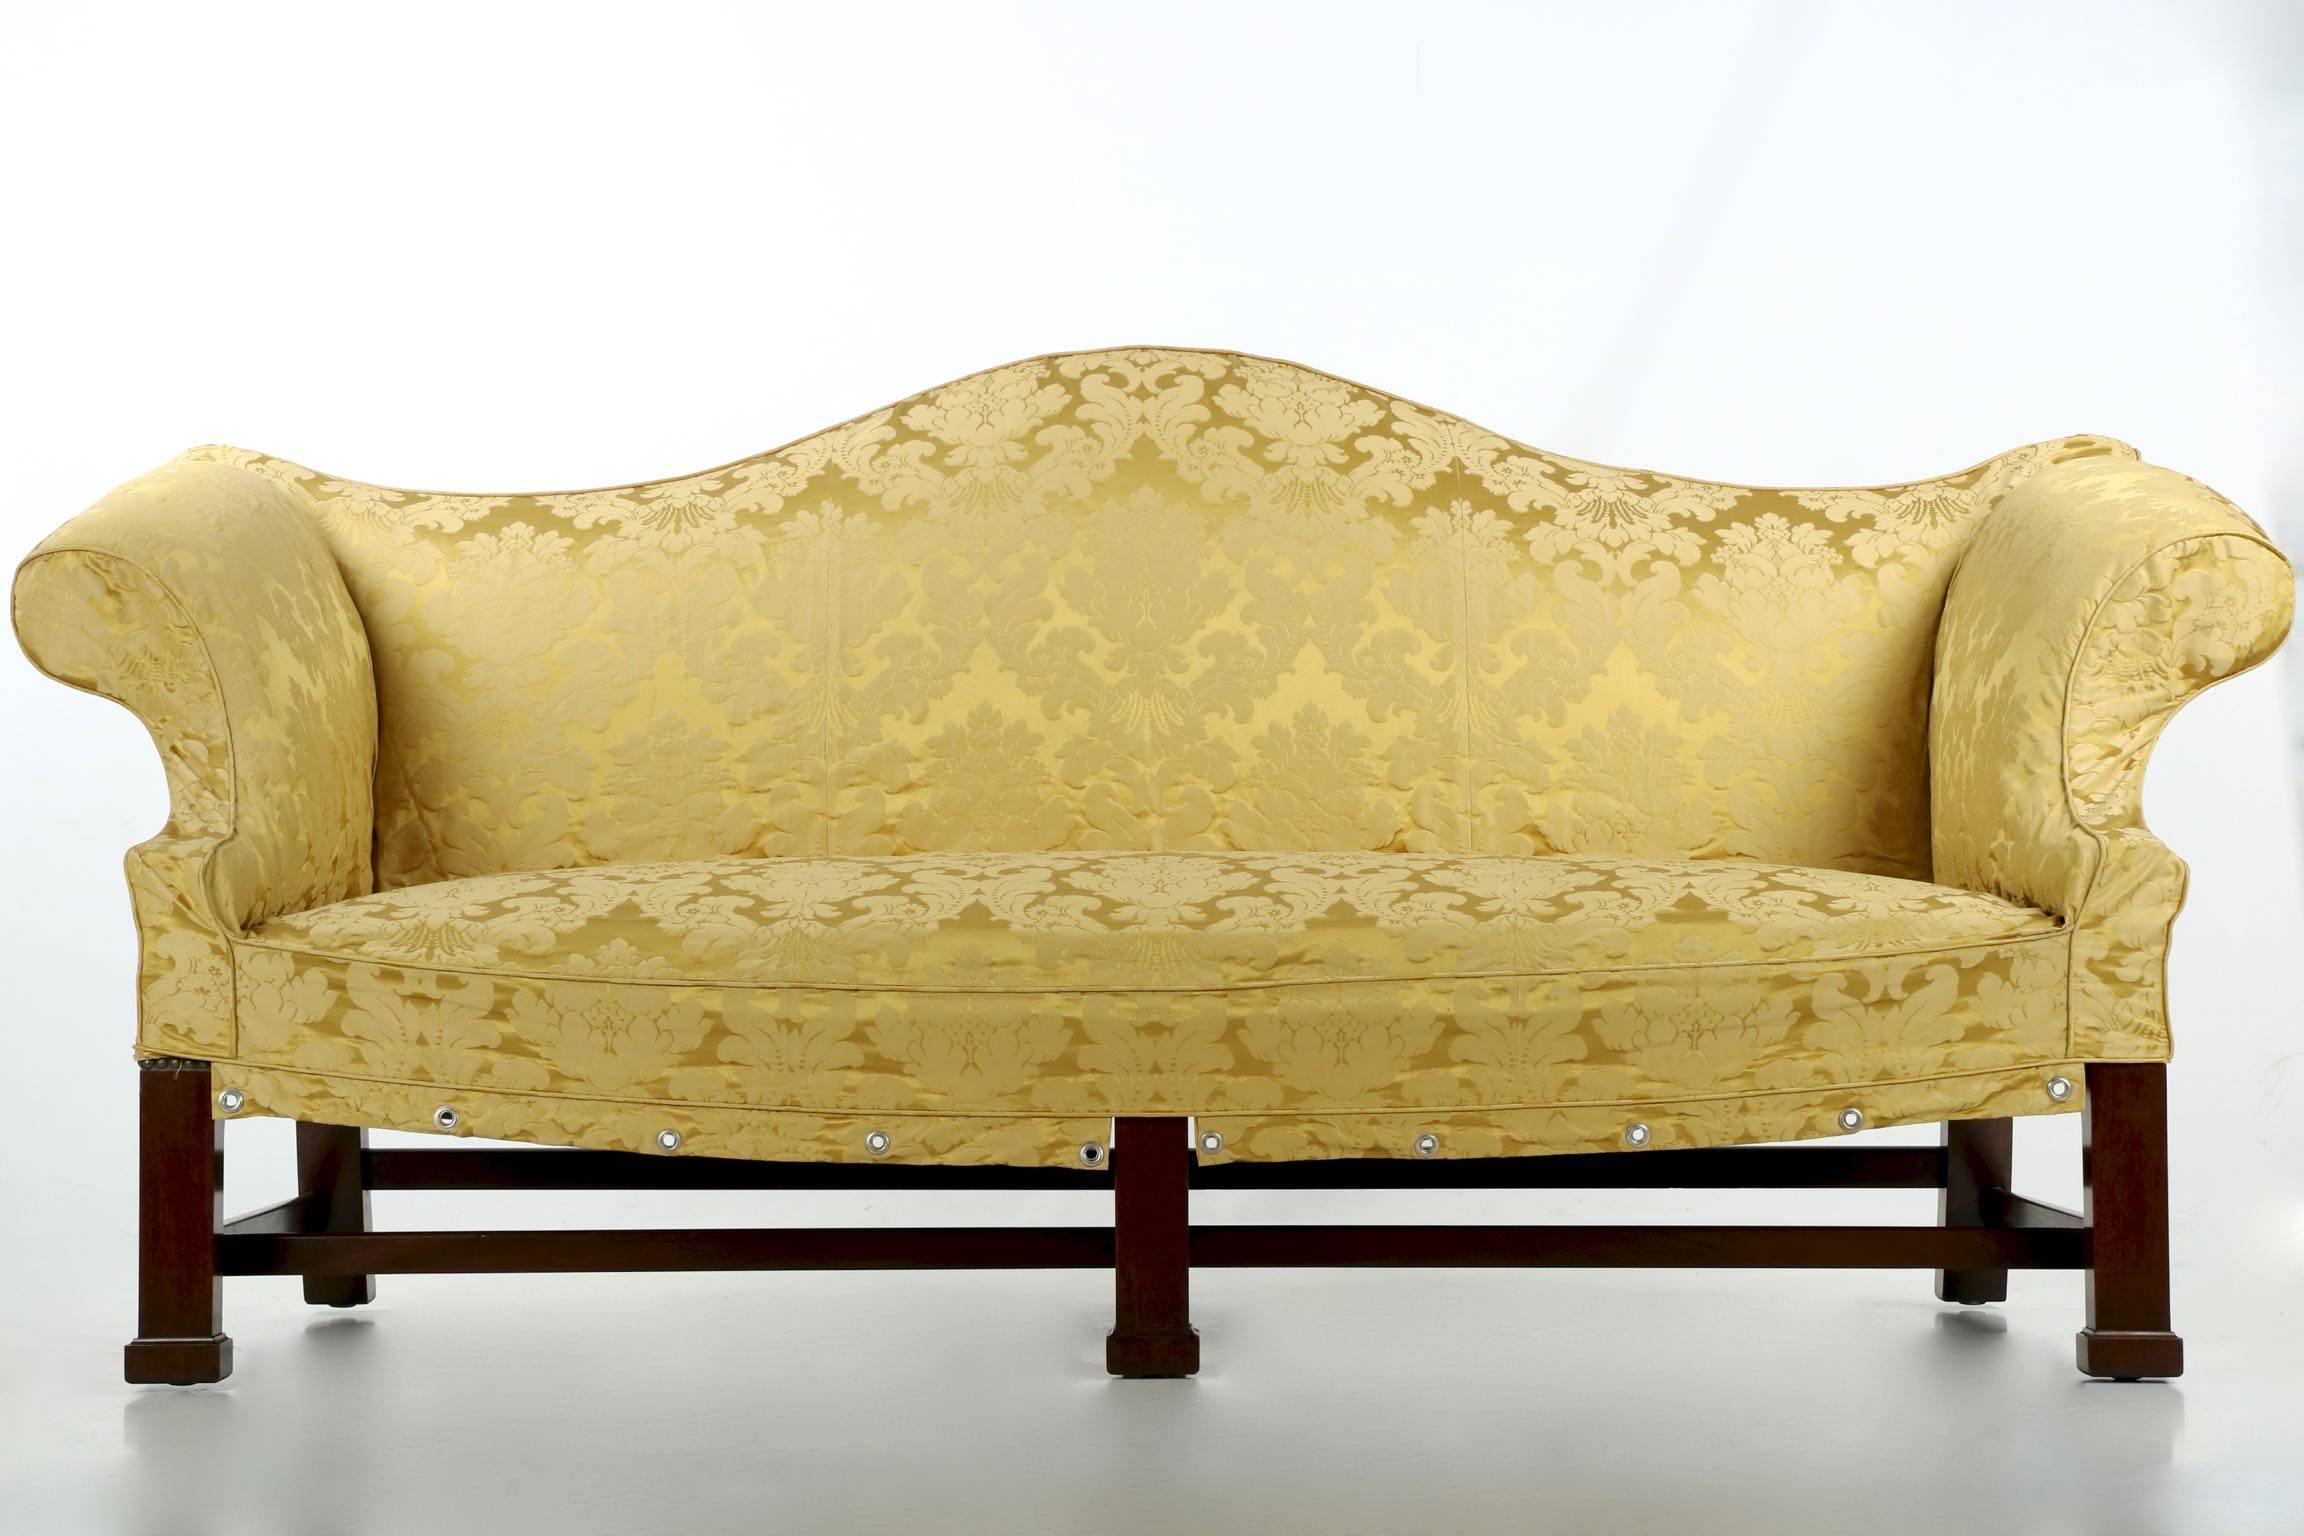 Clearly influenced by the Thomas Affleck sofa currently held in the collection of the Department of State in the Diplomatic Reception rooms, this fine reproduction is powerful and impactful from every angle. Most attractive are the thick mahogany